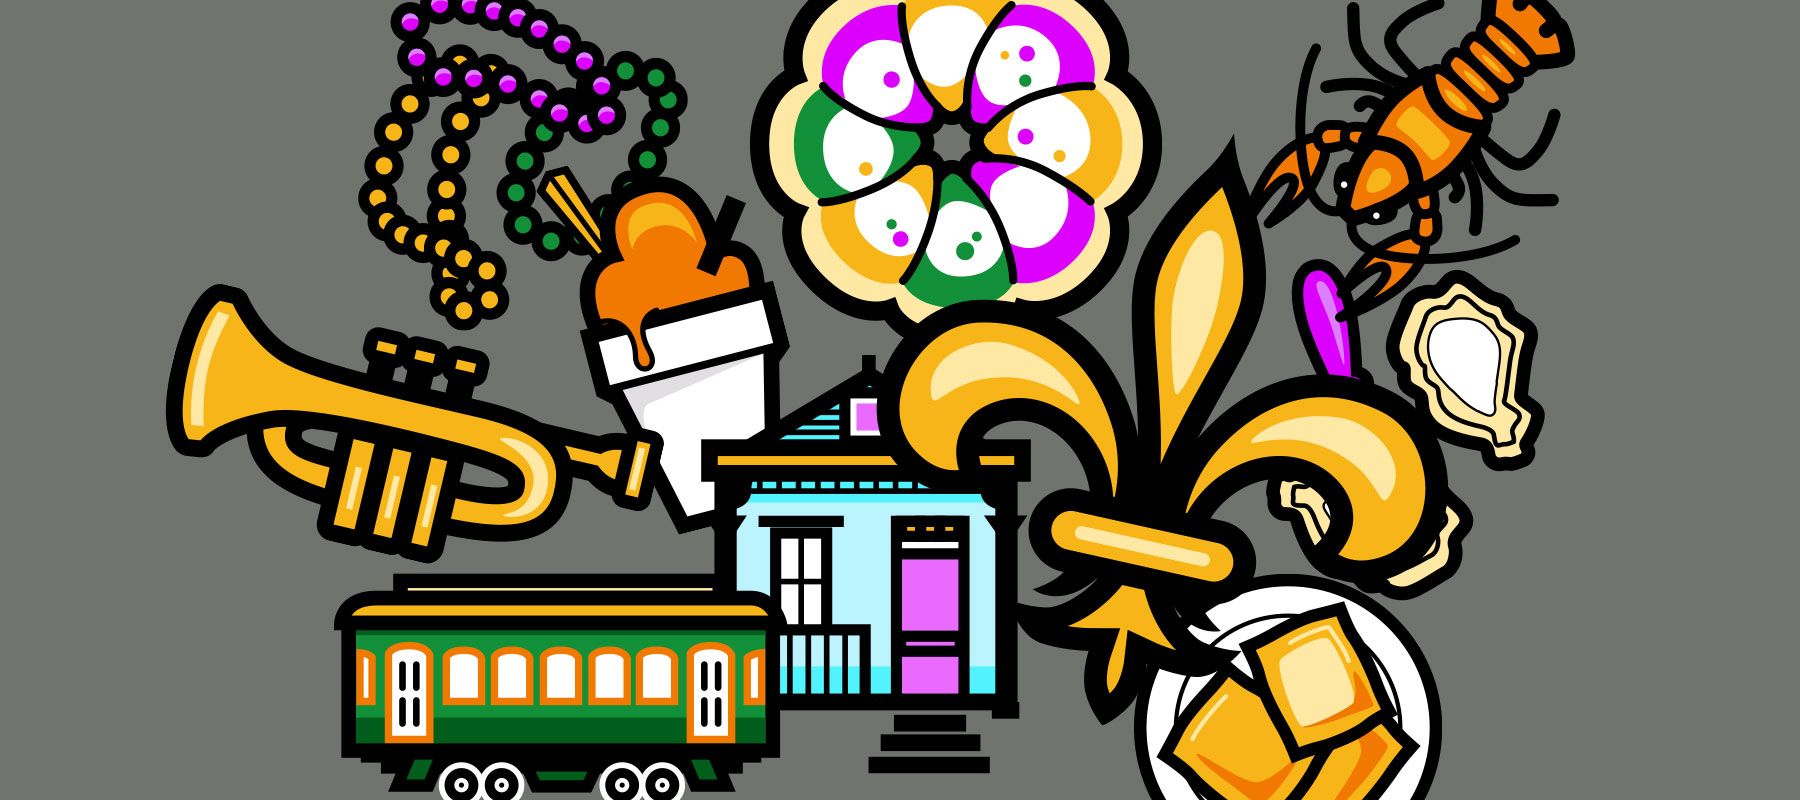 10 Downloadable New Orleans Icons to Spice Up Your Graphics